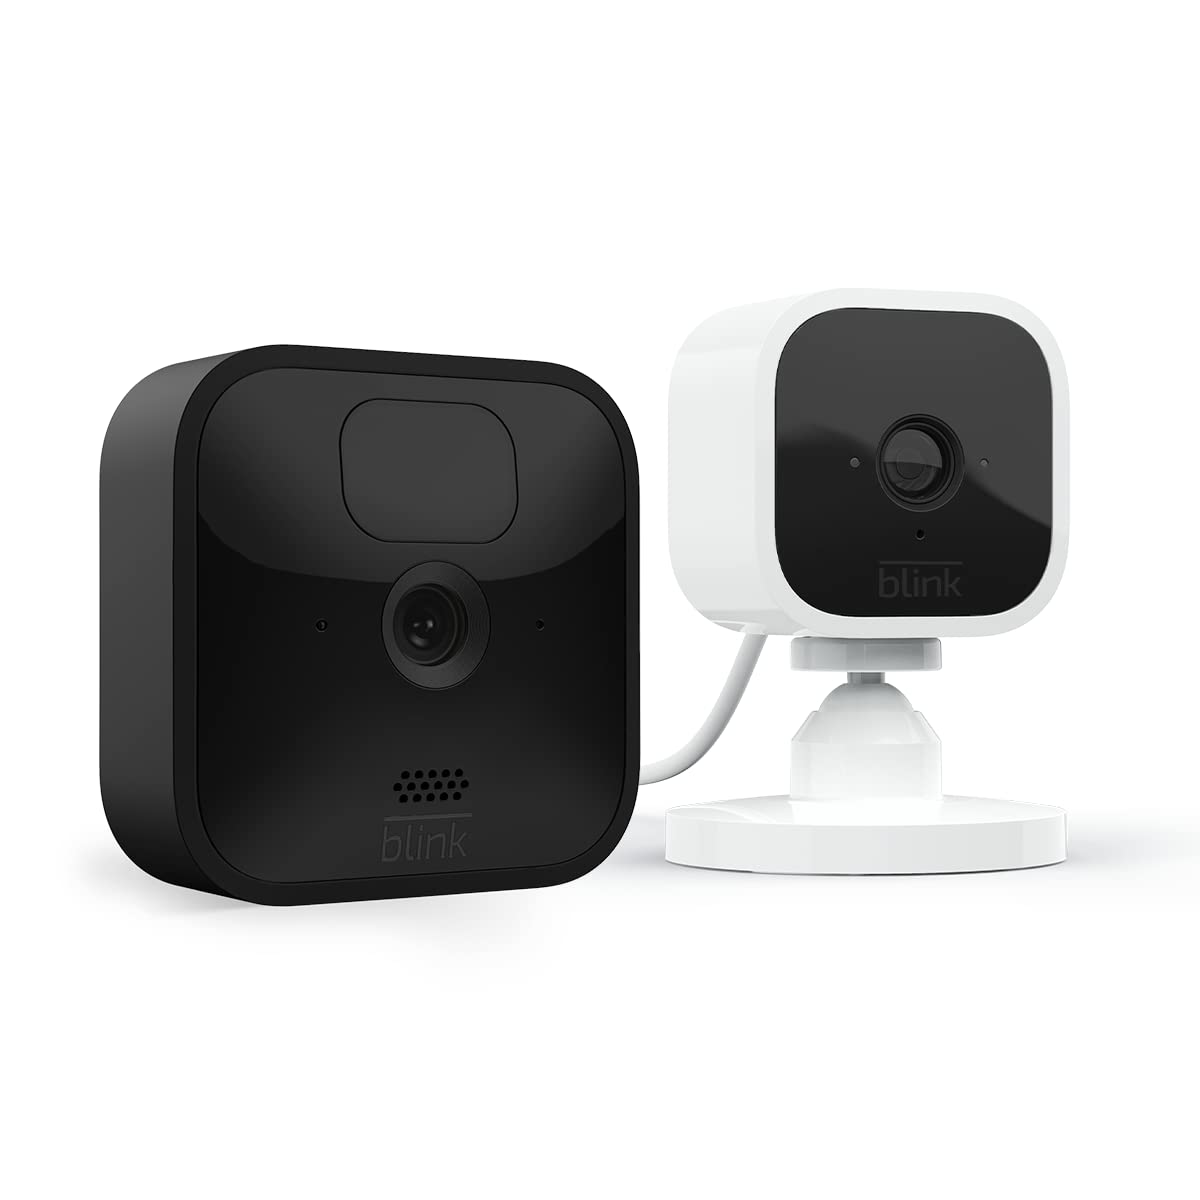 Blink Outdoor HD Security Camera Kit with Blink Mini